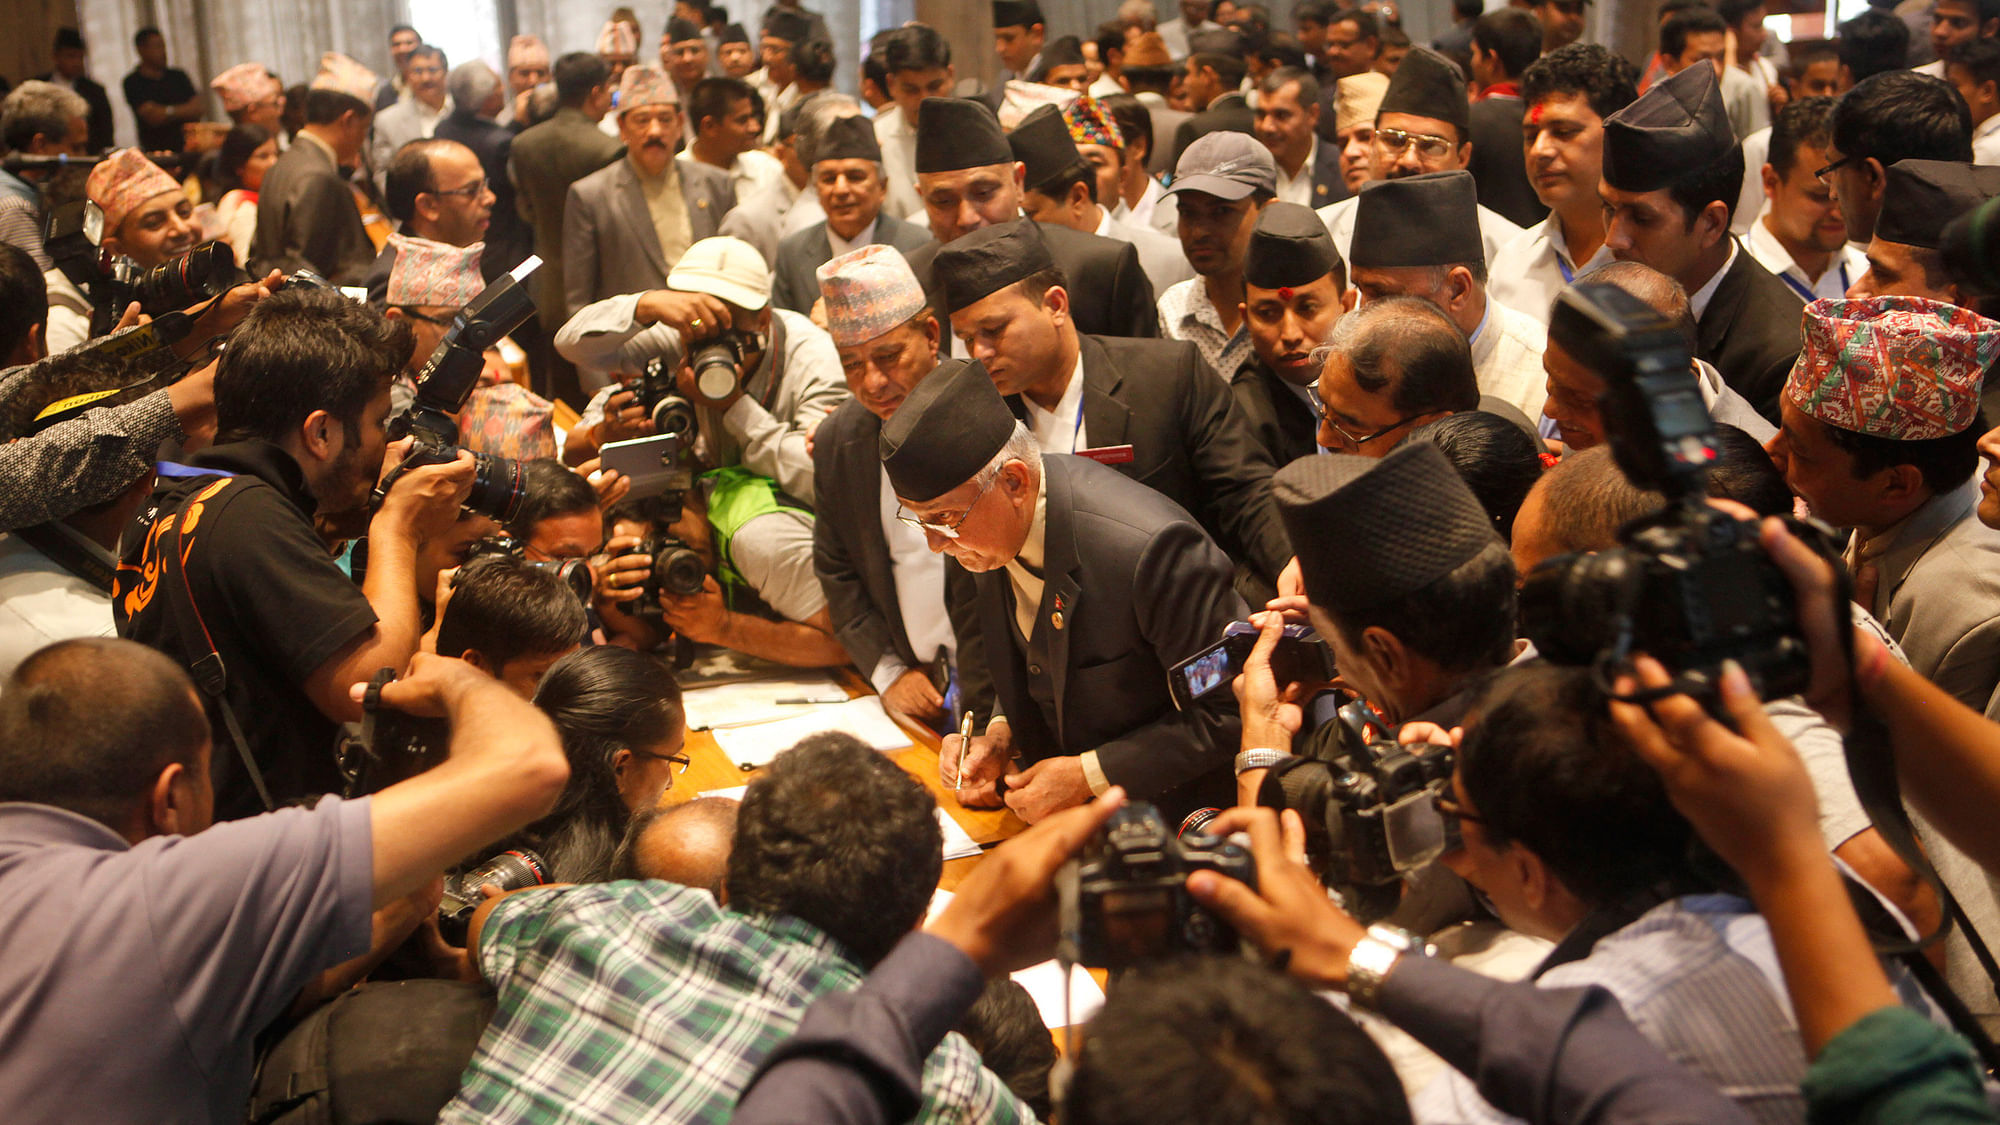  Communist Party of Nepal (Unified Marxist–Leninist) leader KP Oli (center) signs the constitution document. (Photo: AP)